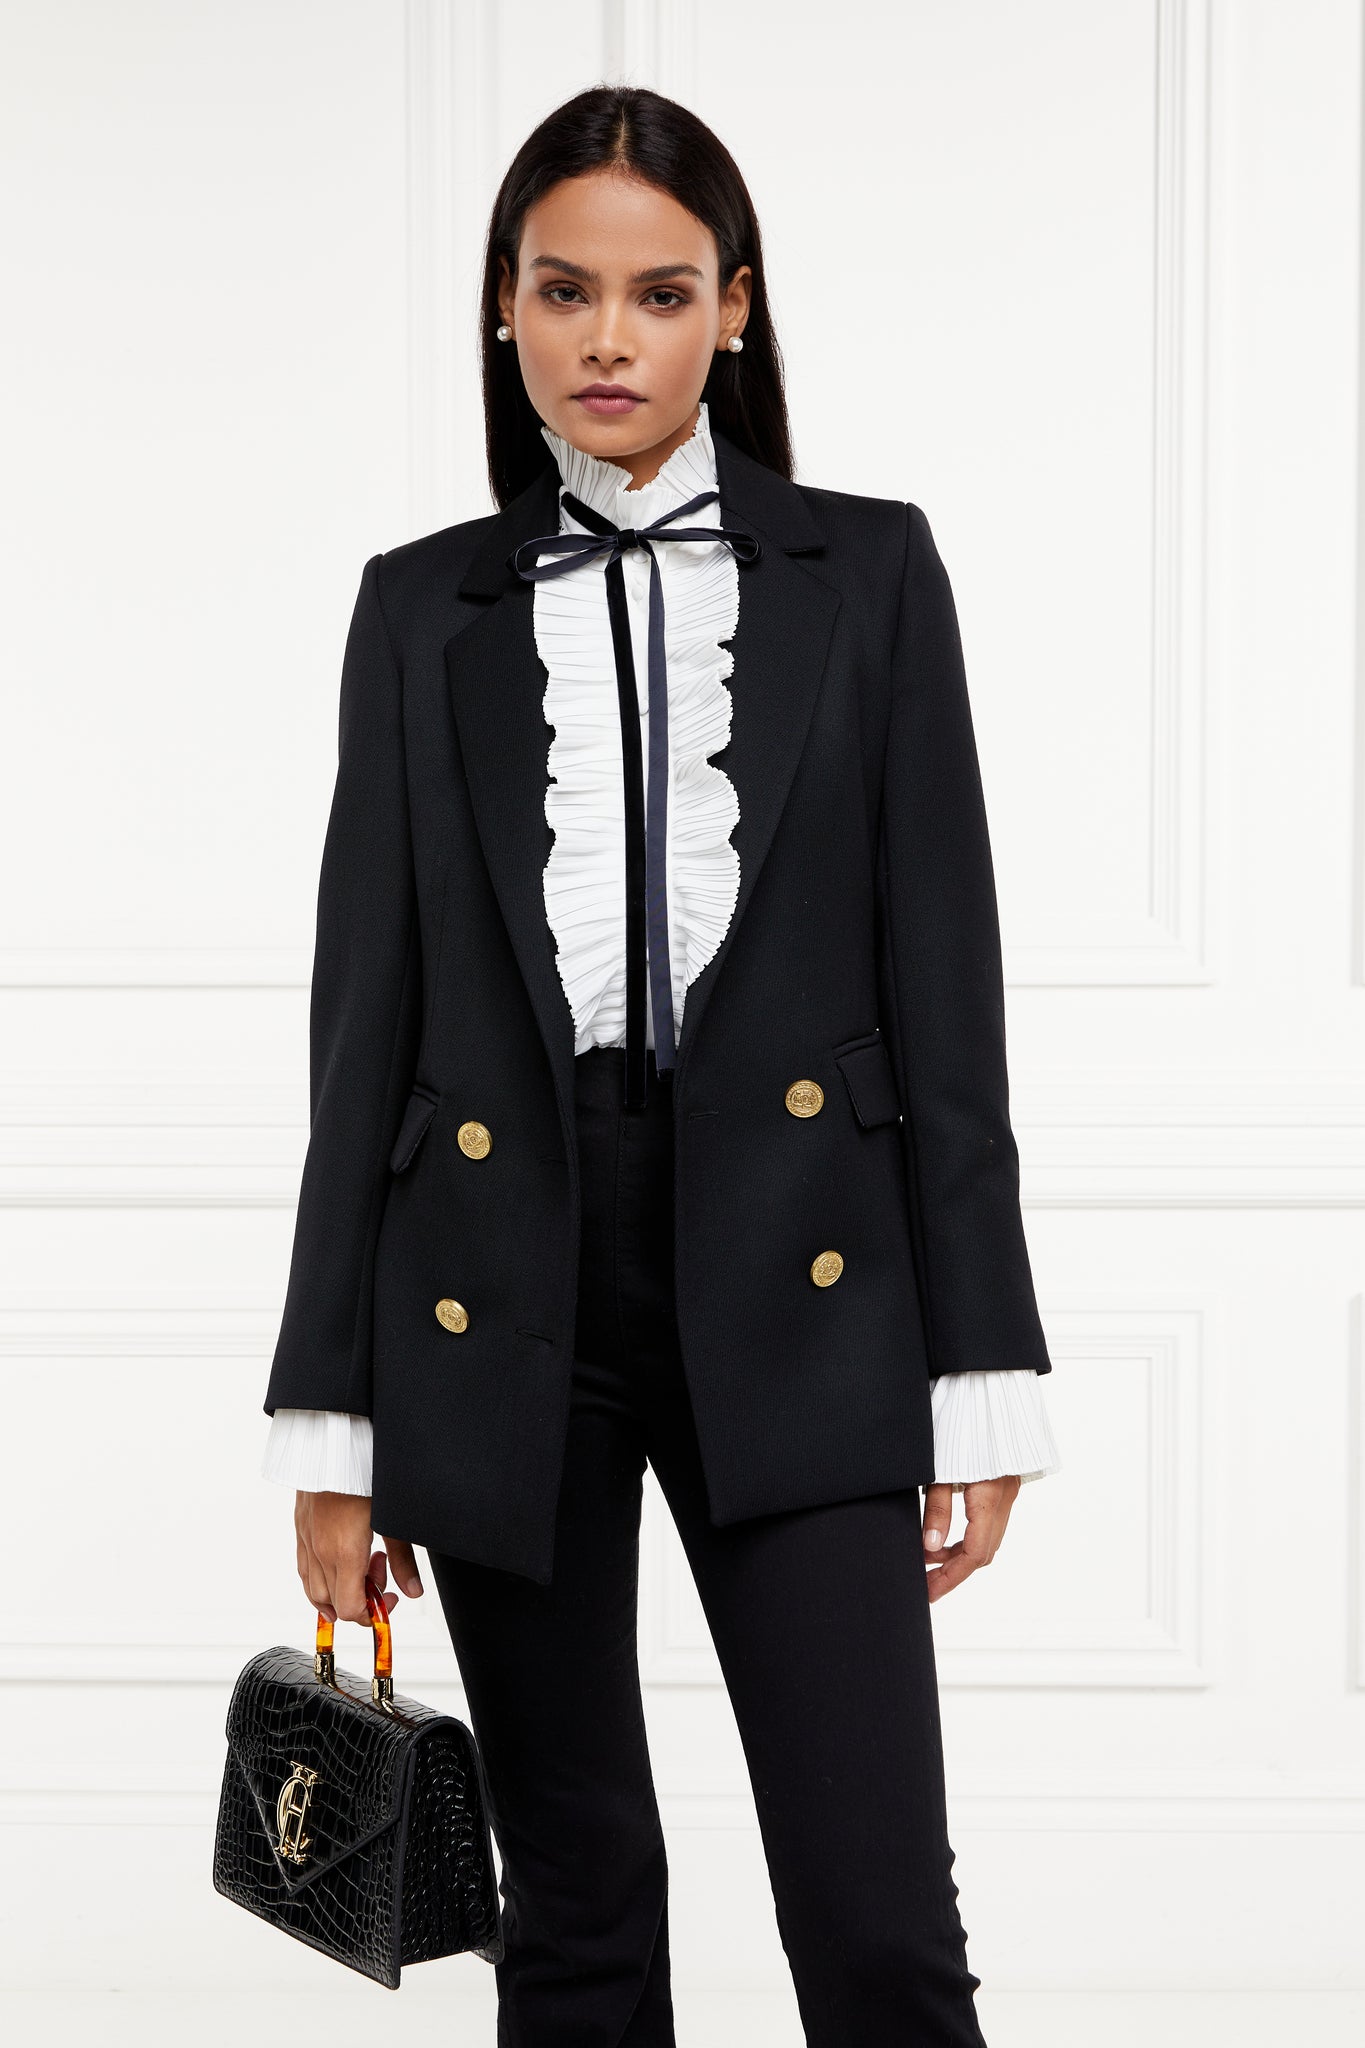 womens relaxed fit white polyester shirt with ruffled front collar and cuffs and removable black tie detail and double breasted black tweed blazer and black croc embossed bag